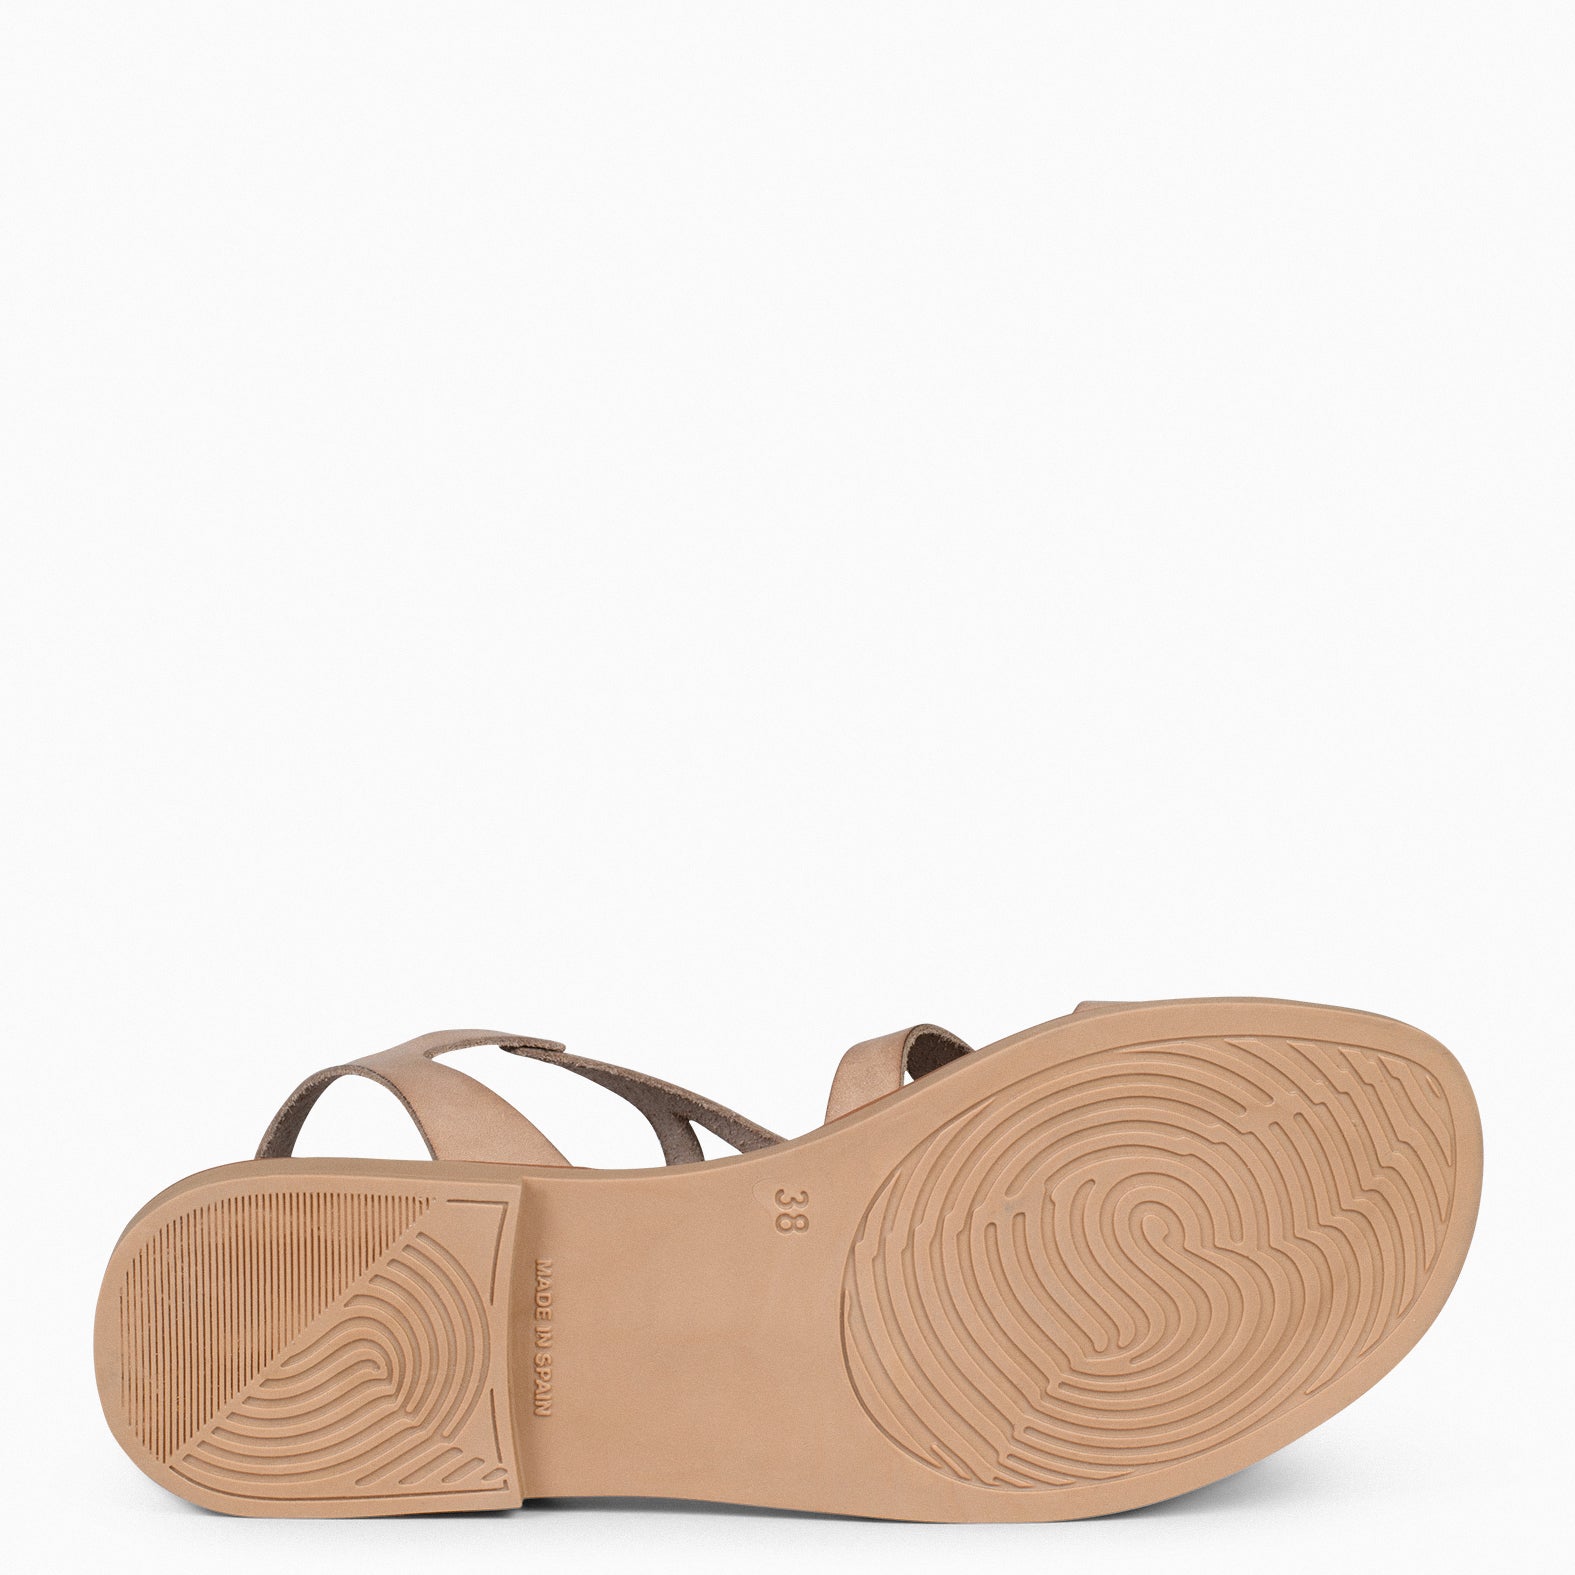 BAMBOO – TAUPE FLAT SANDALS